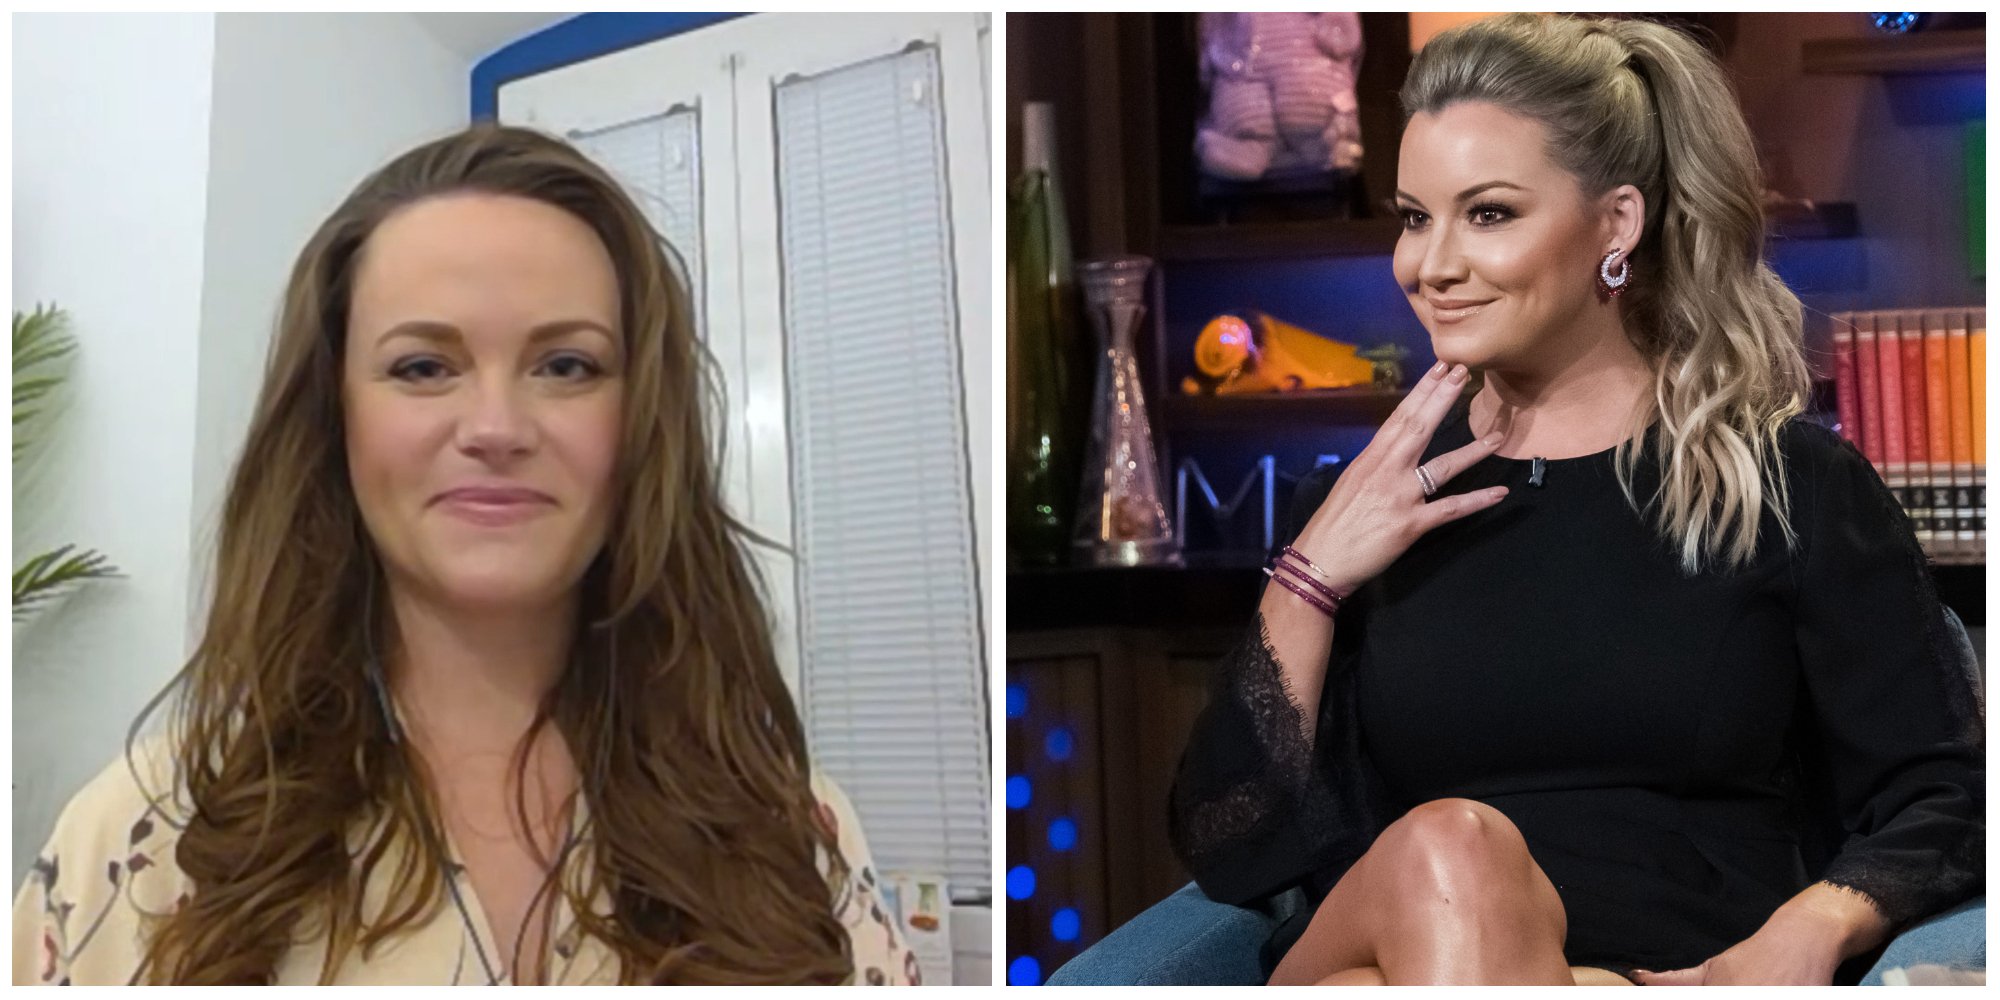 Rachel Hargrove and Hannah Ferrier from Below Deck both appeared on WWHL on different occasions. 